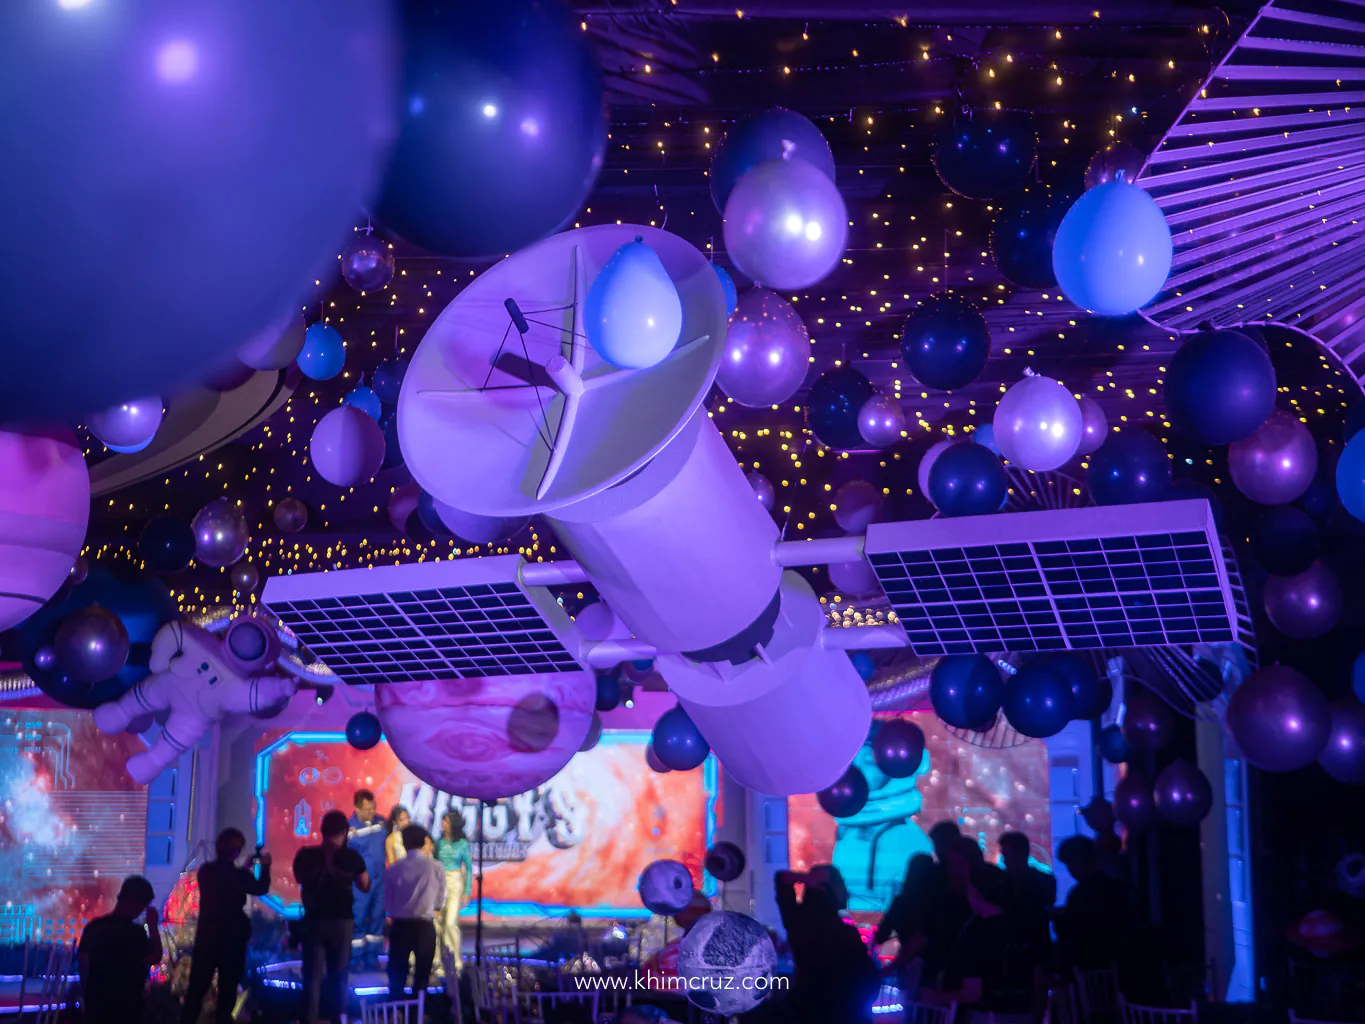 space satellite ceiling installation with planets for a space-themed kid's birthday party